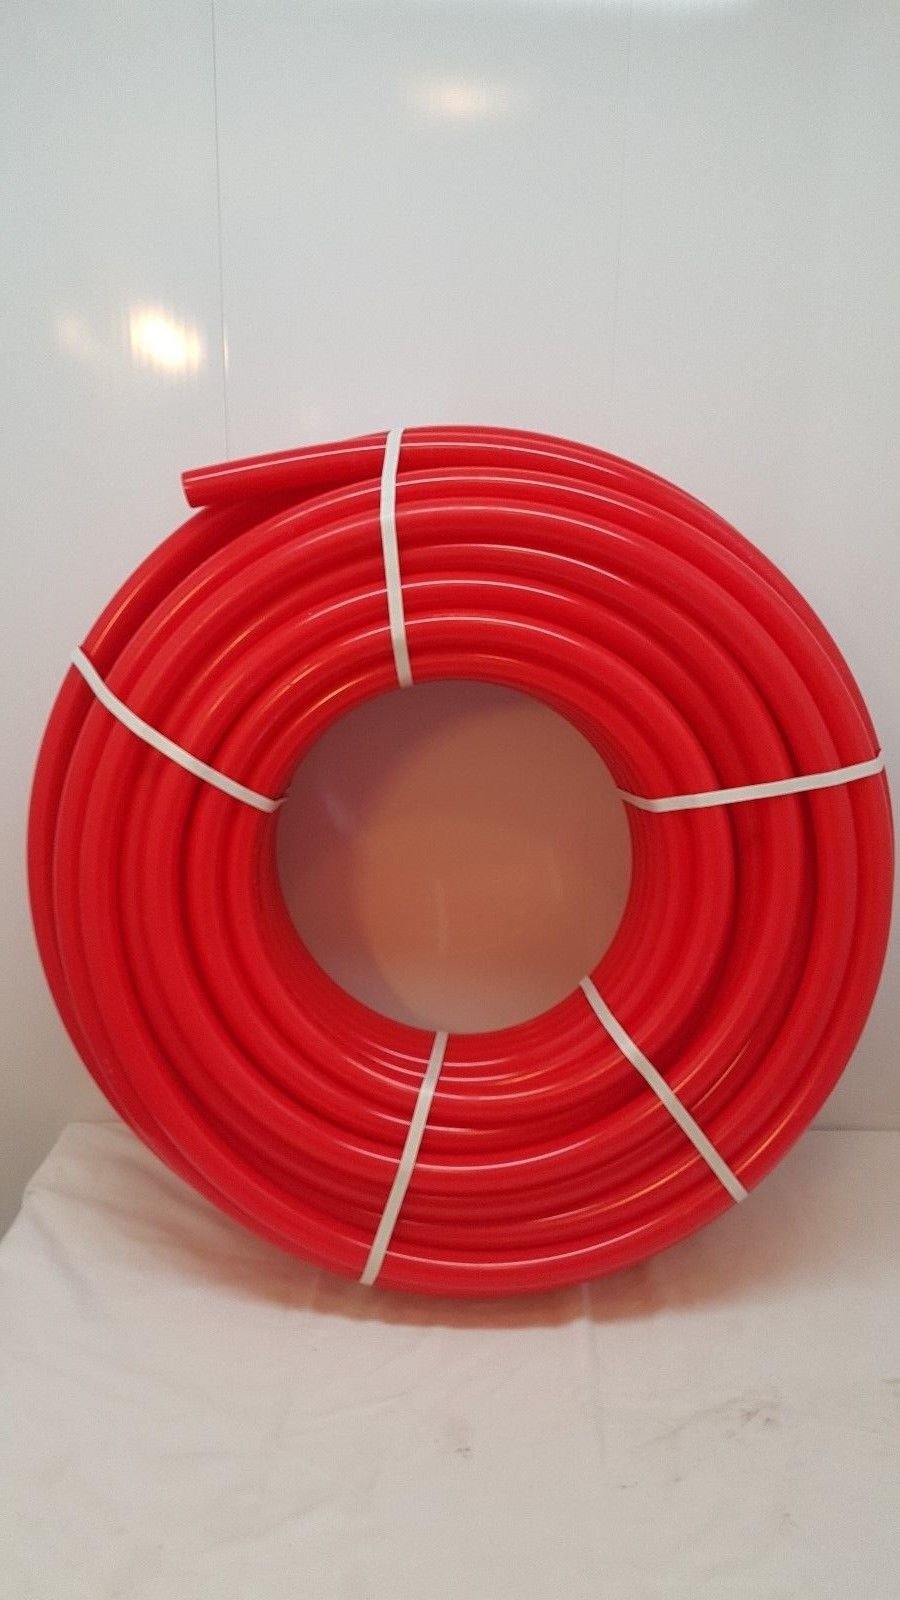 1 1/2" Non Oxygen Barrier Red PEX tubing for heating and plumbing